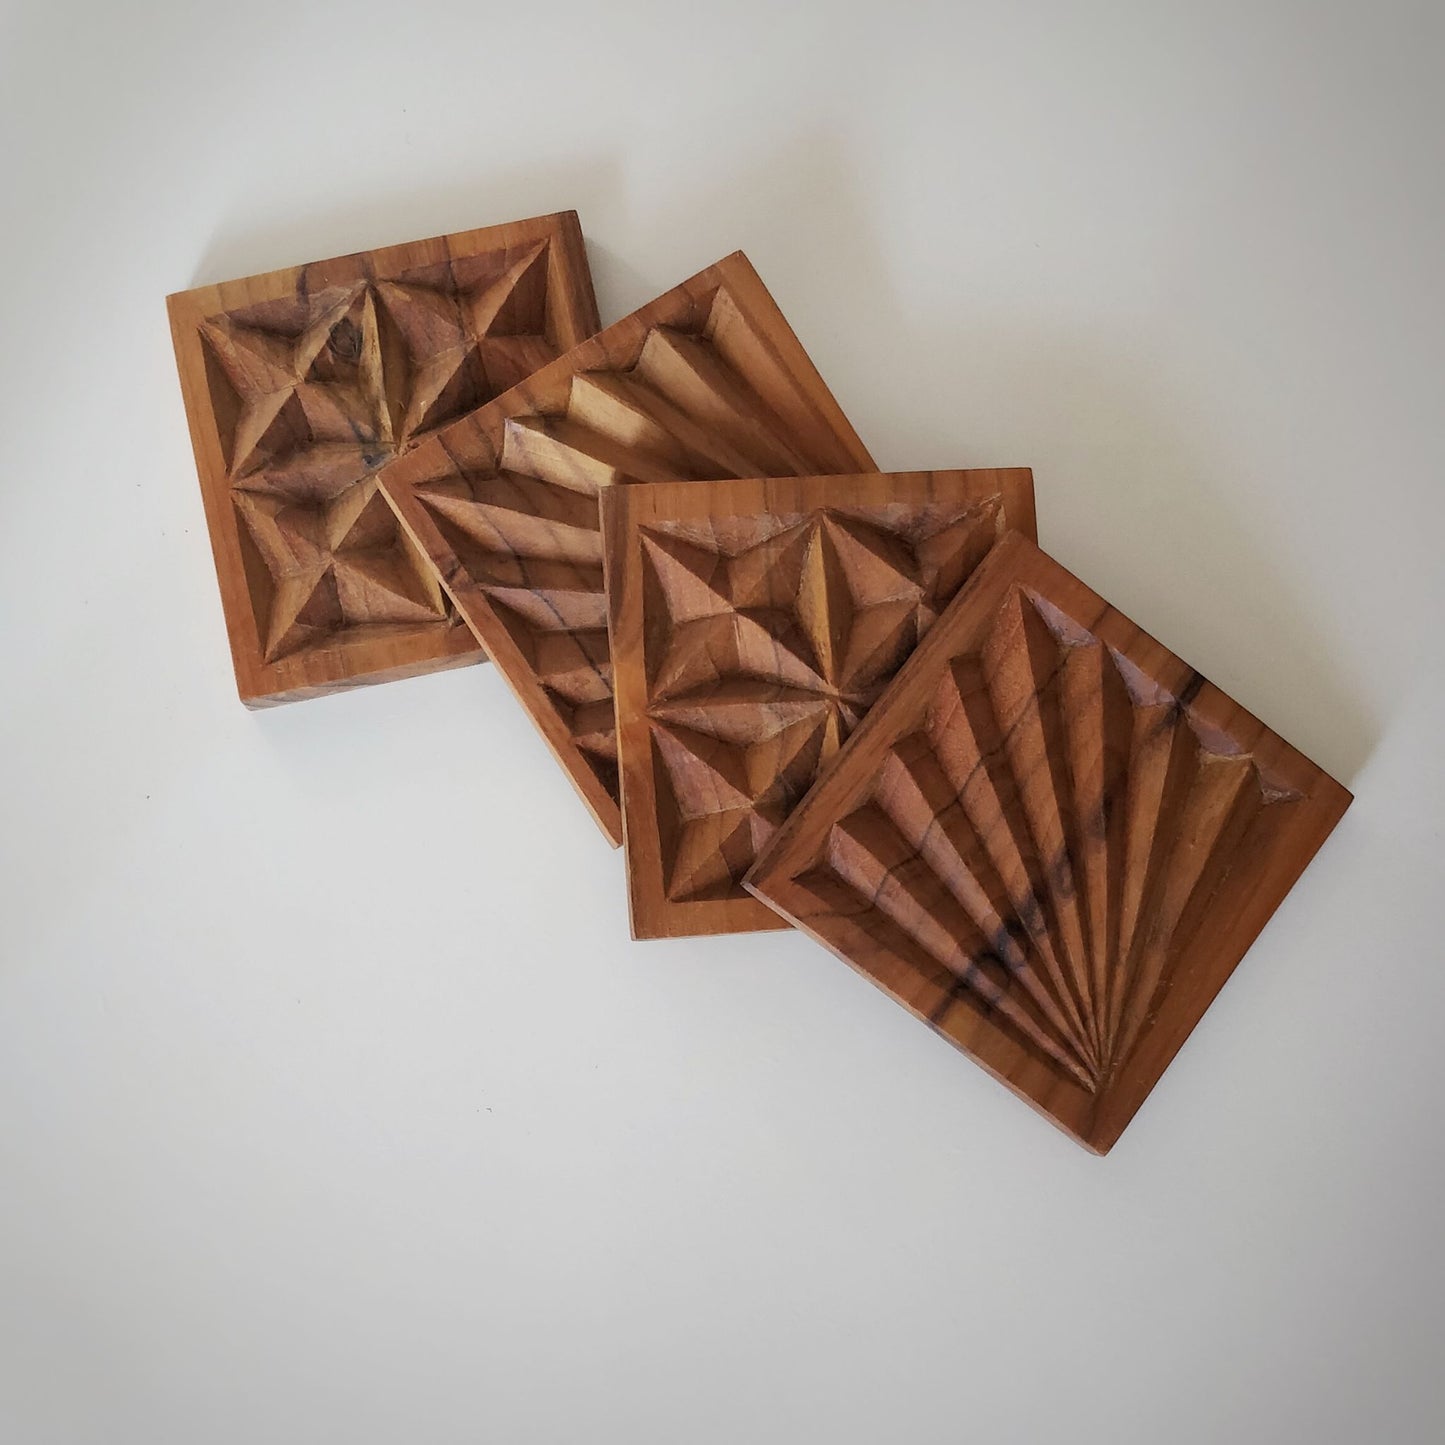 Hand Carved Wooden Coaster Set - Fair Trade from Neema Crafts